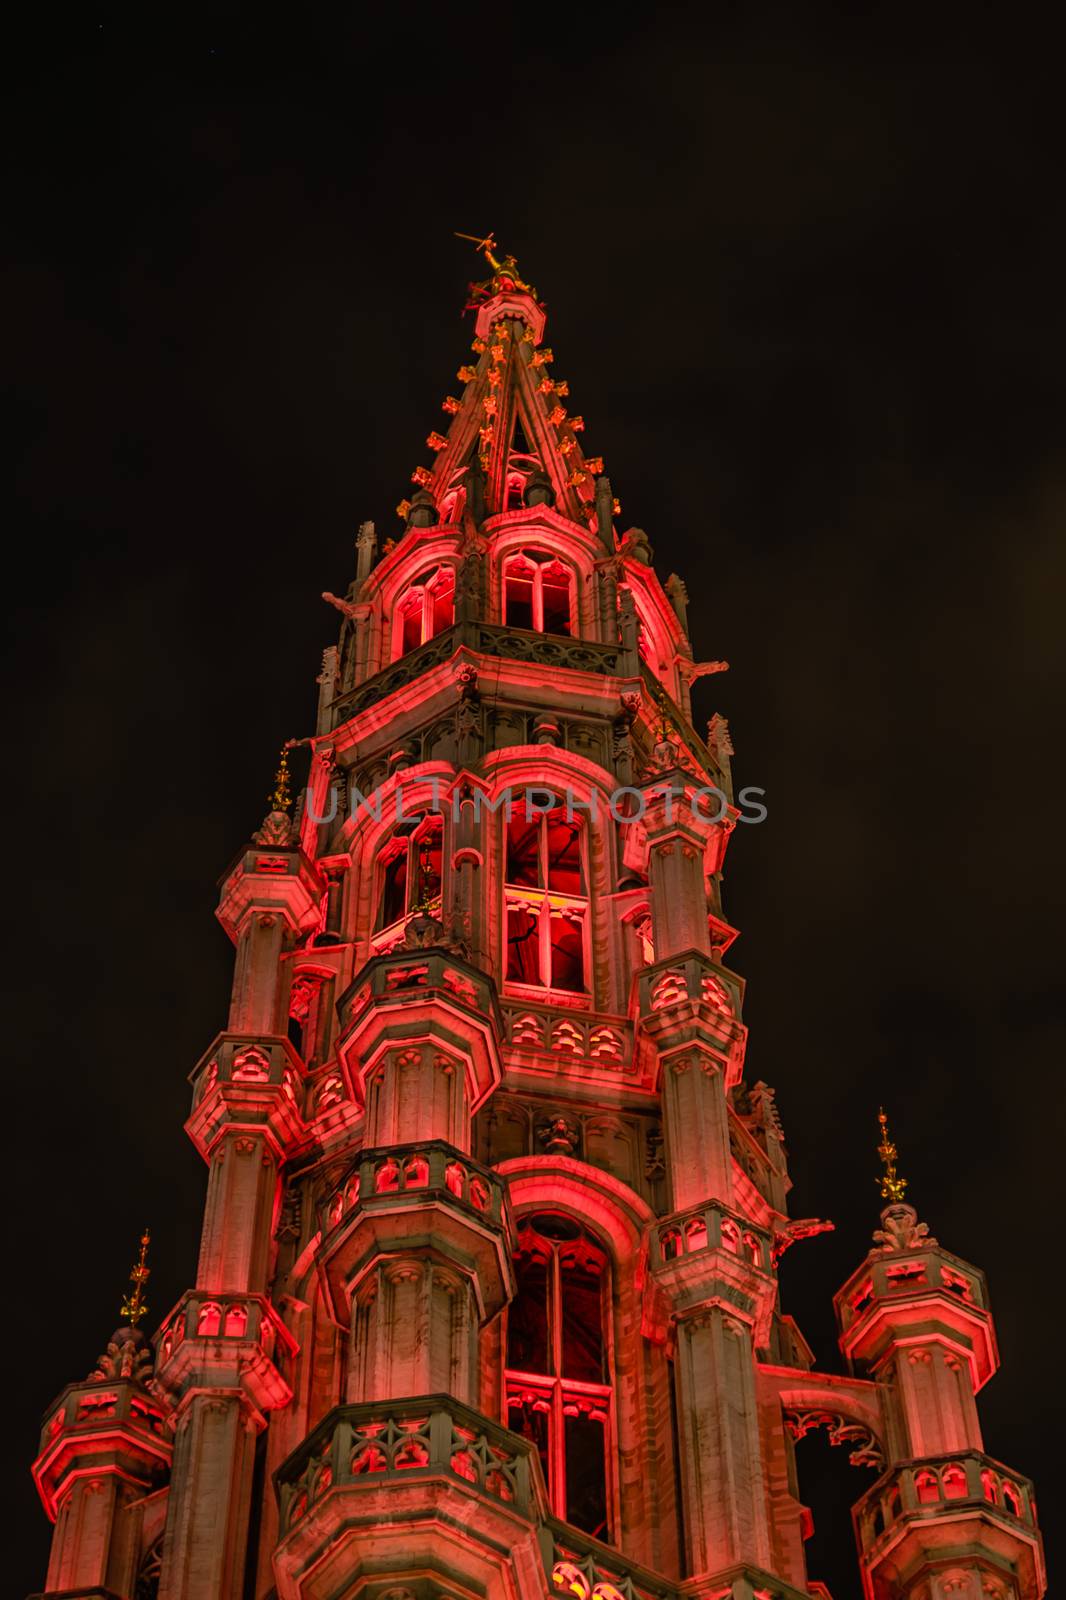 Night view of the tower of the ancient Town Hall in the Grand Place, Brussels, Belgium.